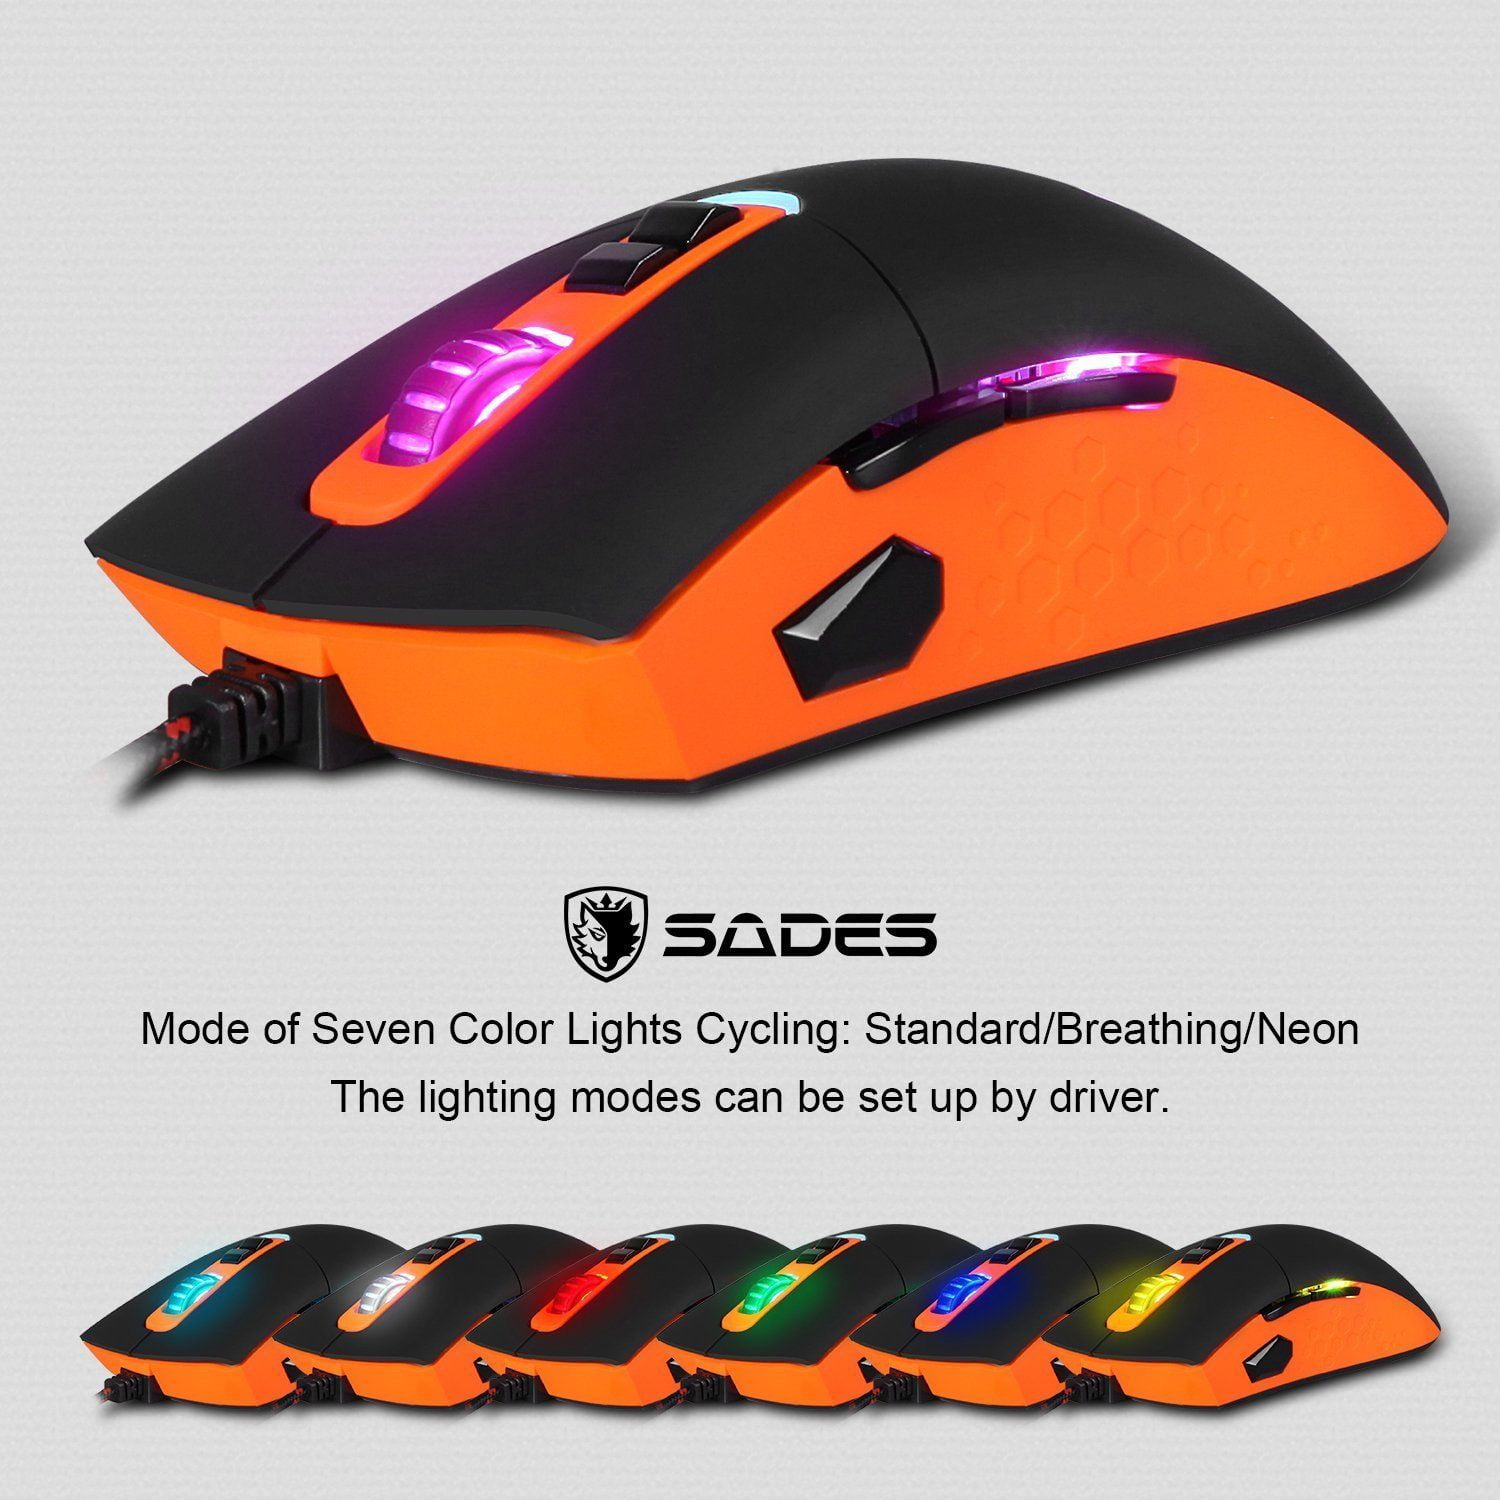 Sades S6 Cataclysm USB PC Gaming Mouse with LED Lights Black